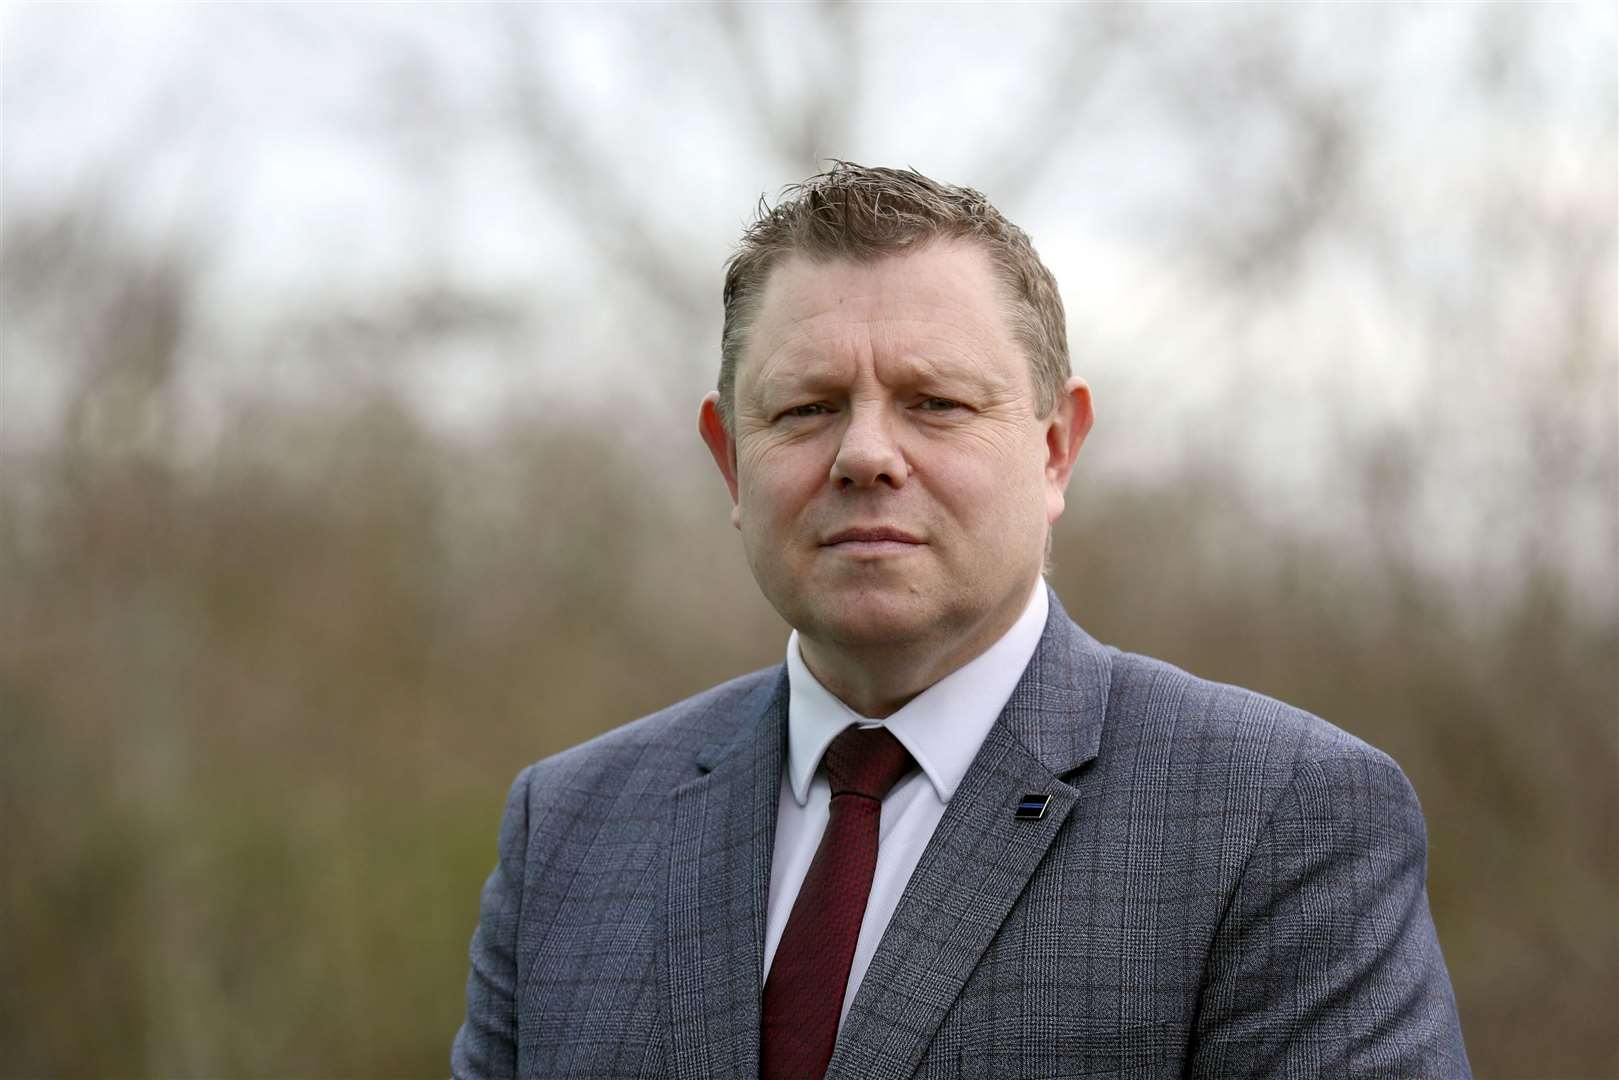 Police Federation chairman John Apter said the weaponising of Covid-19 was ‘a sad indictment’ of society (Steve Parsons/PA)